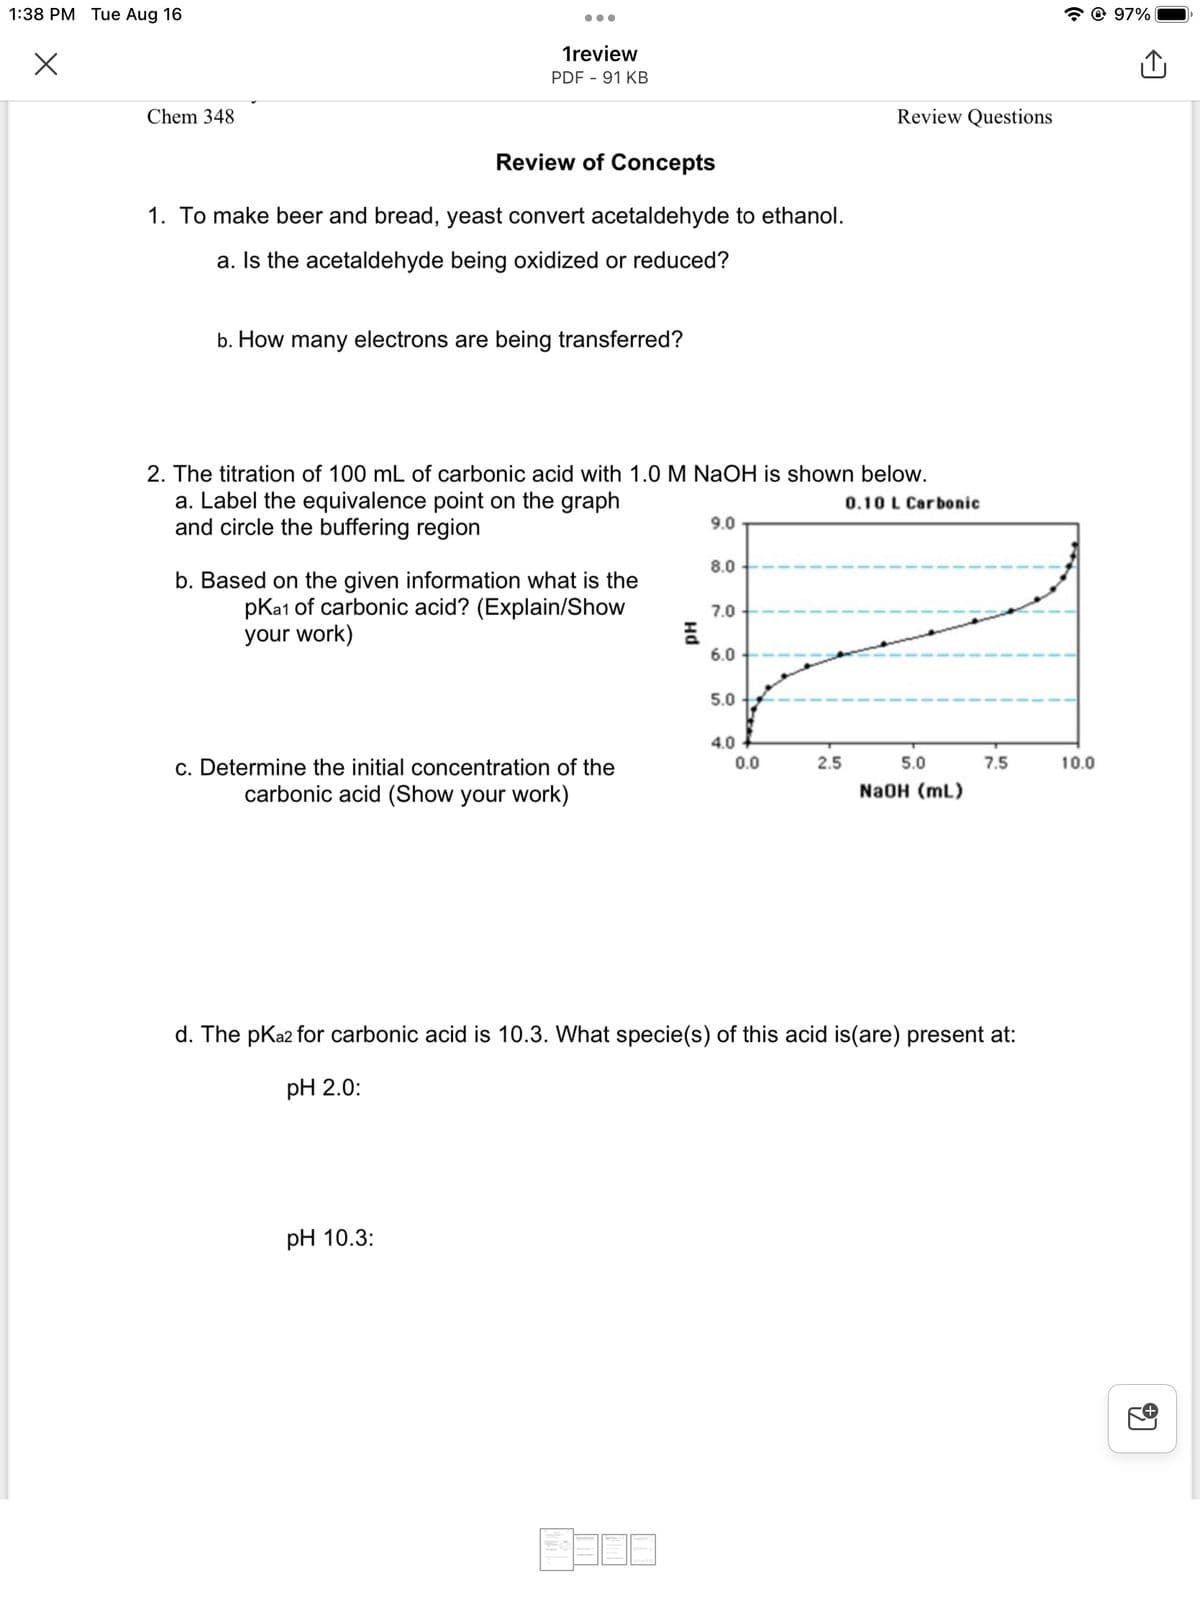 1:38 PM Tue Aug 16
X
Chem 348
1review
PDF - 91 KB
Review of Concepts
1. To make beer and bread, yeast convert acetaldehyde to ethanol.
a. Is the acetaldehyde being oxidized or reduced?
b. How many electrons are being transferred?
2. The titration of 100 mL of carbonic acid with 1.0 M NaOH is shown below.
a. Label the equivalence point on the graph
and circle the buffering region
0.10 L Carbonic
b. Based on the given information what is the
pka1 of carbonic acid? (Explain/Show
your work)
c. Determine the initial concentration of the
carbonic acid (Show your work)
pH 10.3:
Hd
9.0
8.0
7.0
6.0
5.0
4.0
0.0
Review Questions
2.5
5.0
NaOH (mL)
7.5
d. The pka2 for carbonic acid is 10.3. What specie(s) of this acid is(are) present at:
pH 2.0:
✪ 97%
10.0